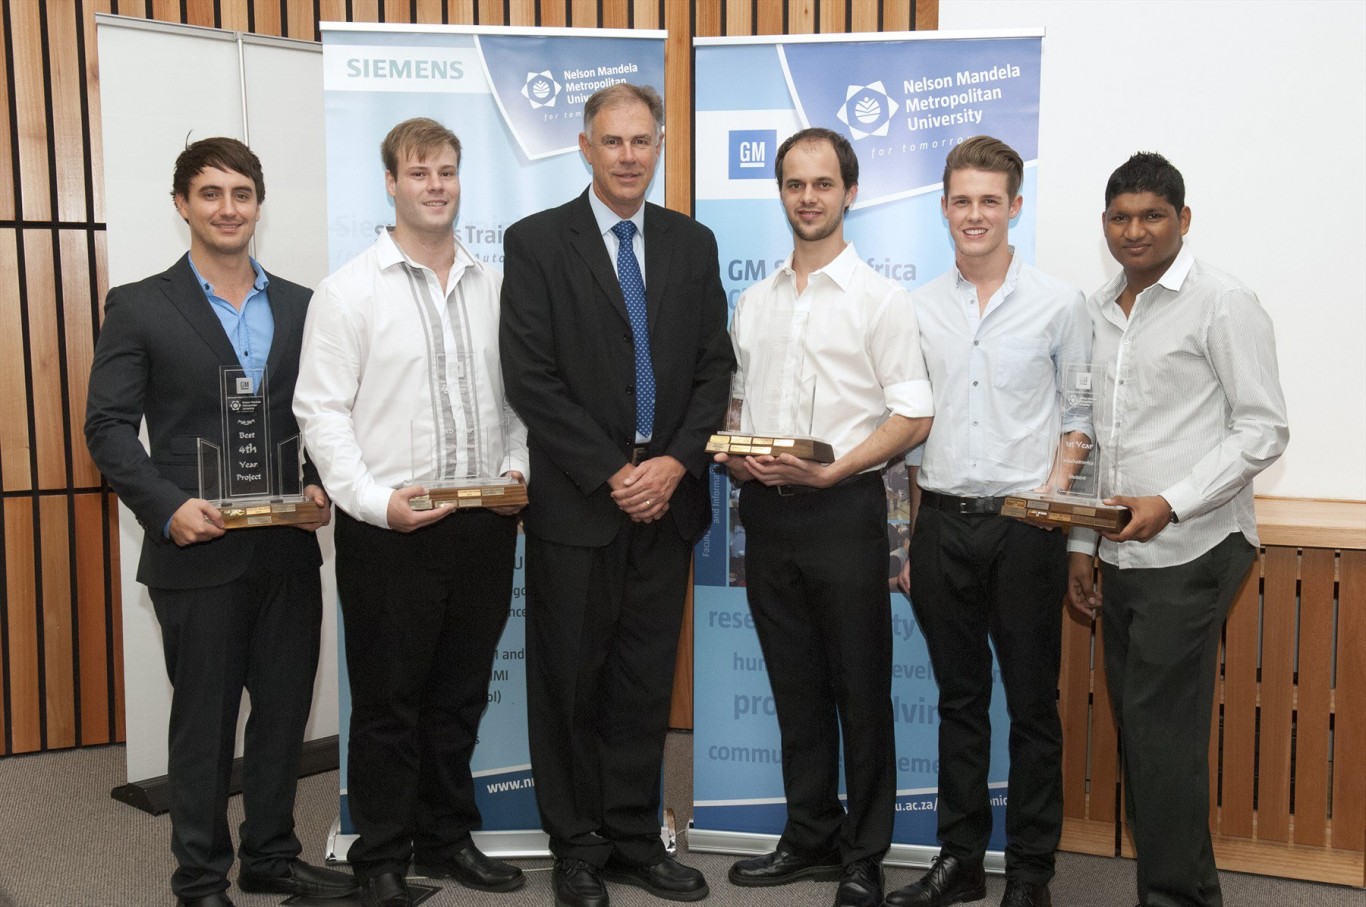 Obtaining Merit Awards for their fourth year projects in Mechatronics Engineering in 2015, are from left: Scott Burton, Theo Weyers, Mr Wayne Osborne GMSA Training and Organisational Development Manager), Hein Swanepoel, Richard Kirton and Shaish Gopichand.